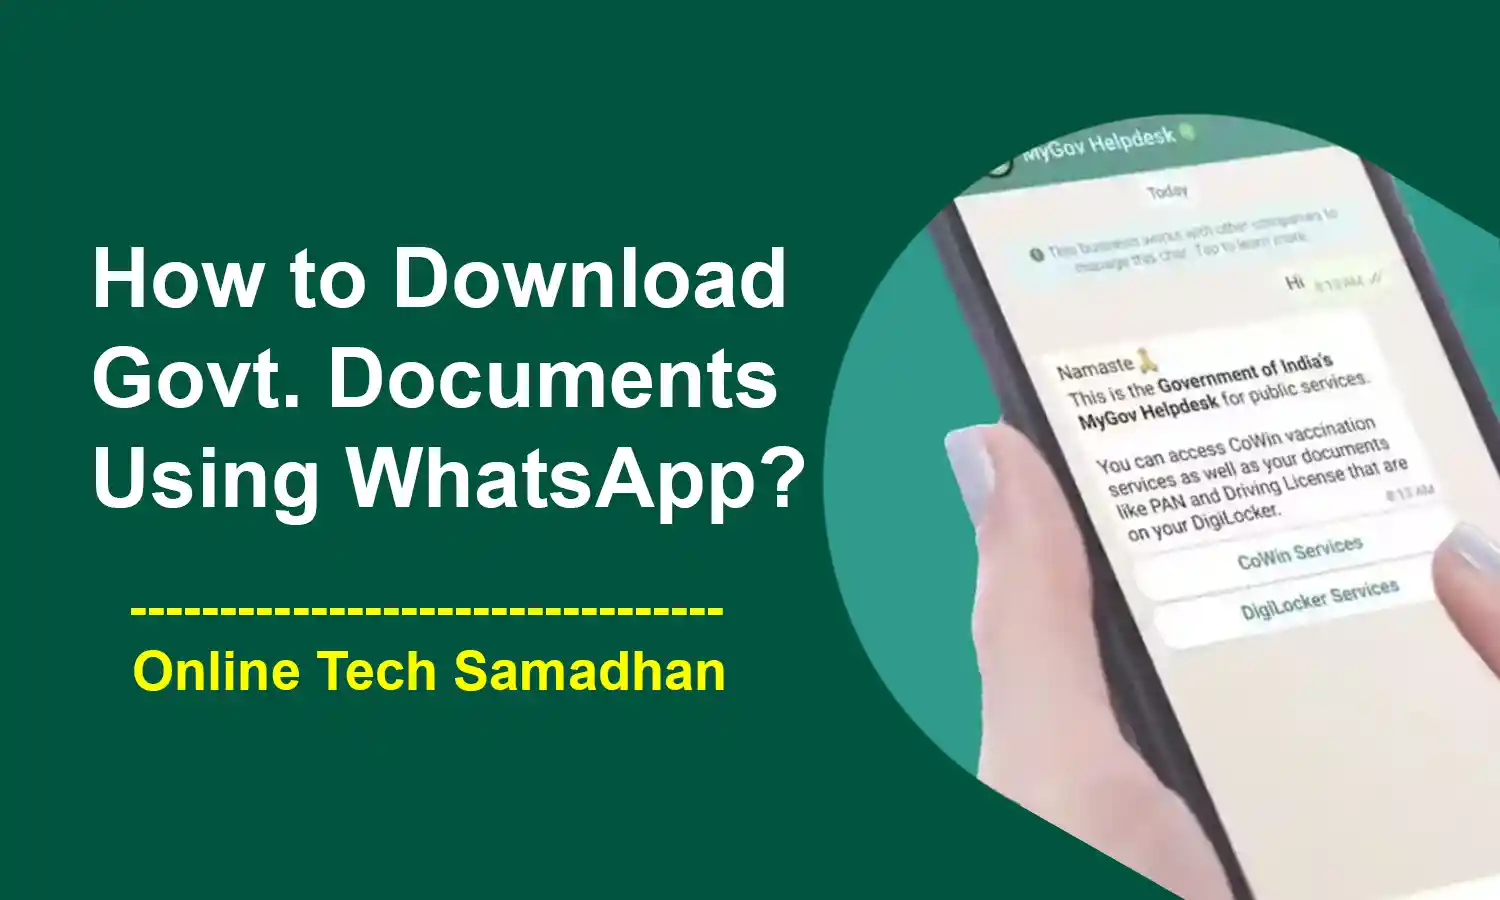 Download Government Documents on WhatsApp